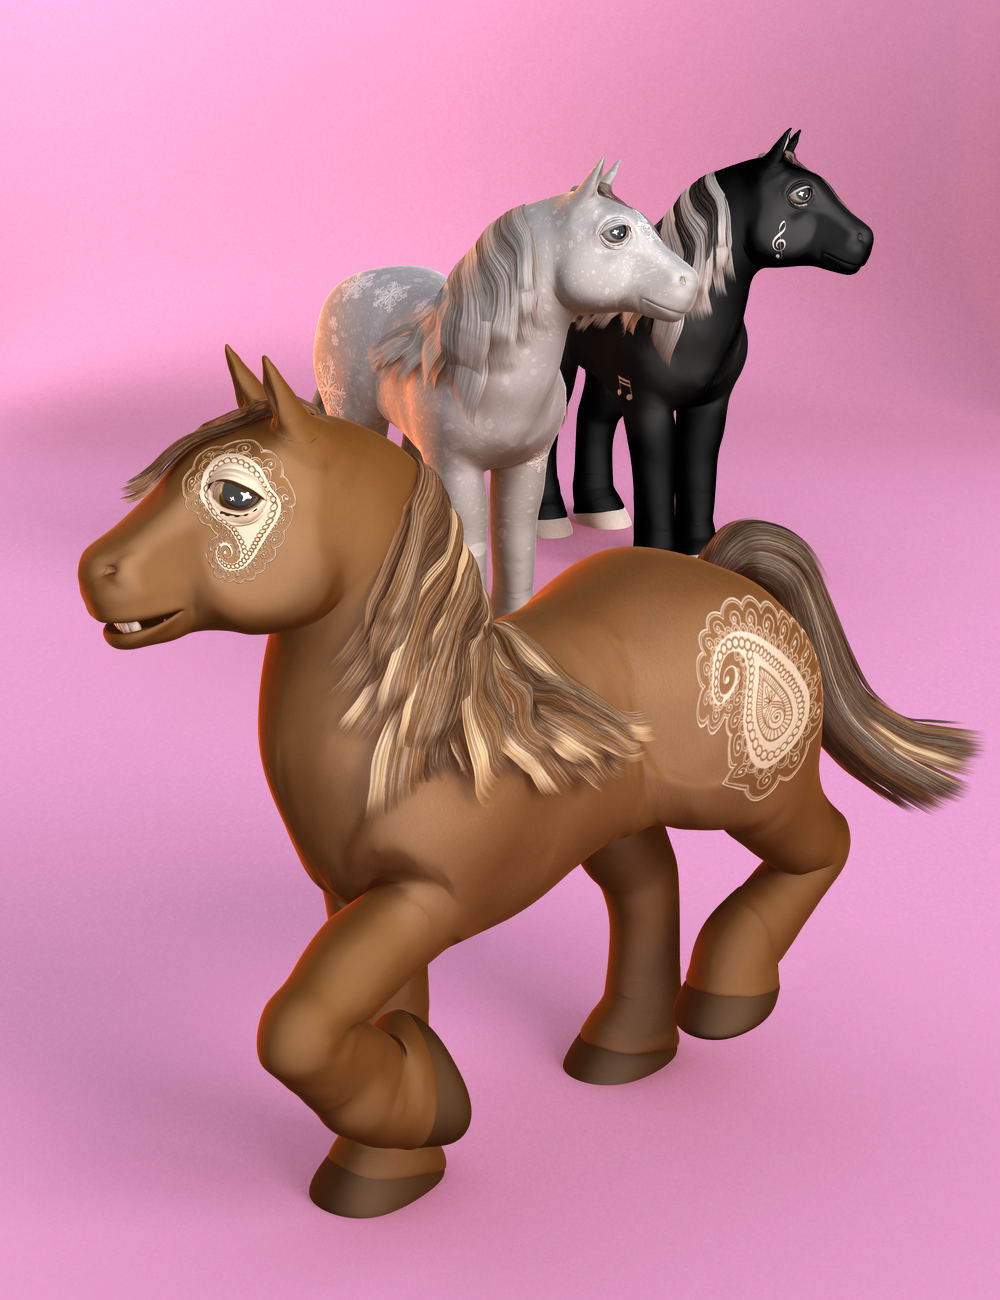 Pretty Ponies by: Canary3d, 3D Models by Daz 3D